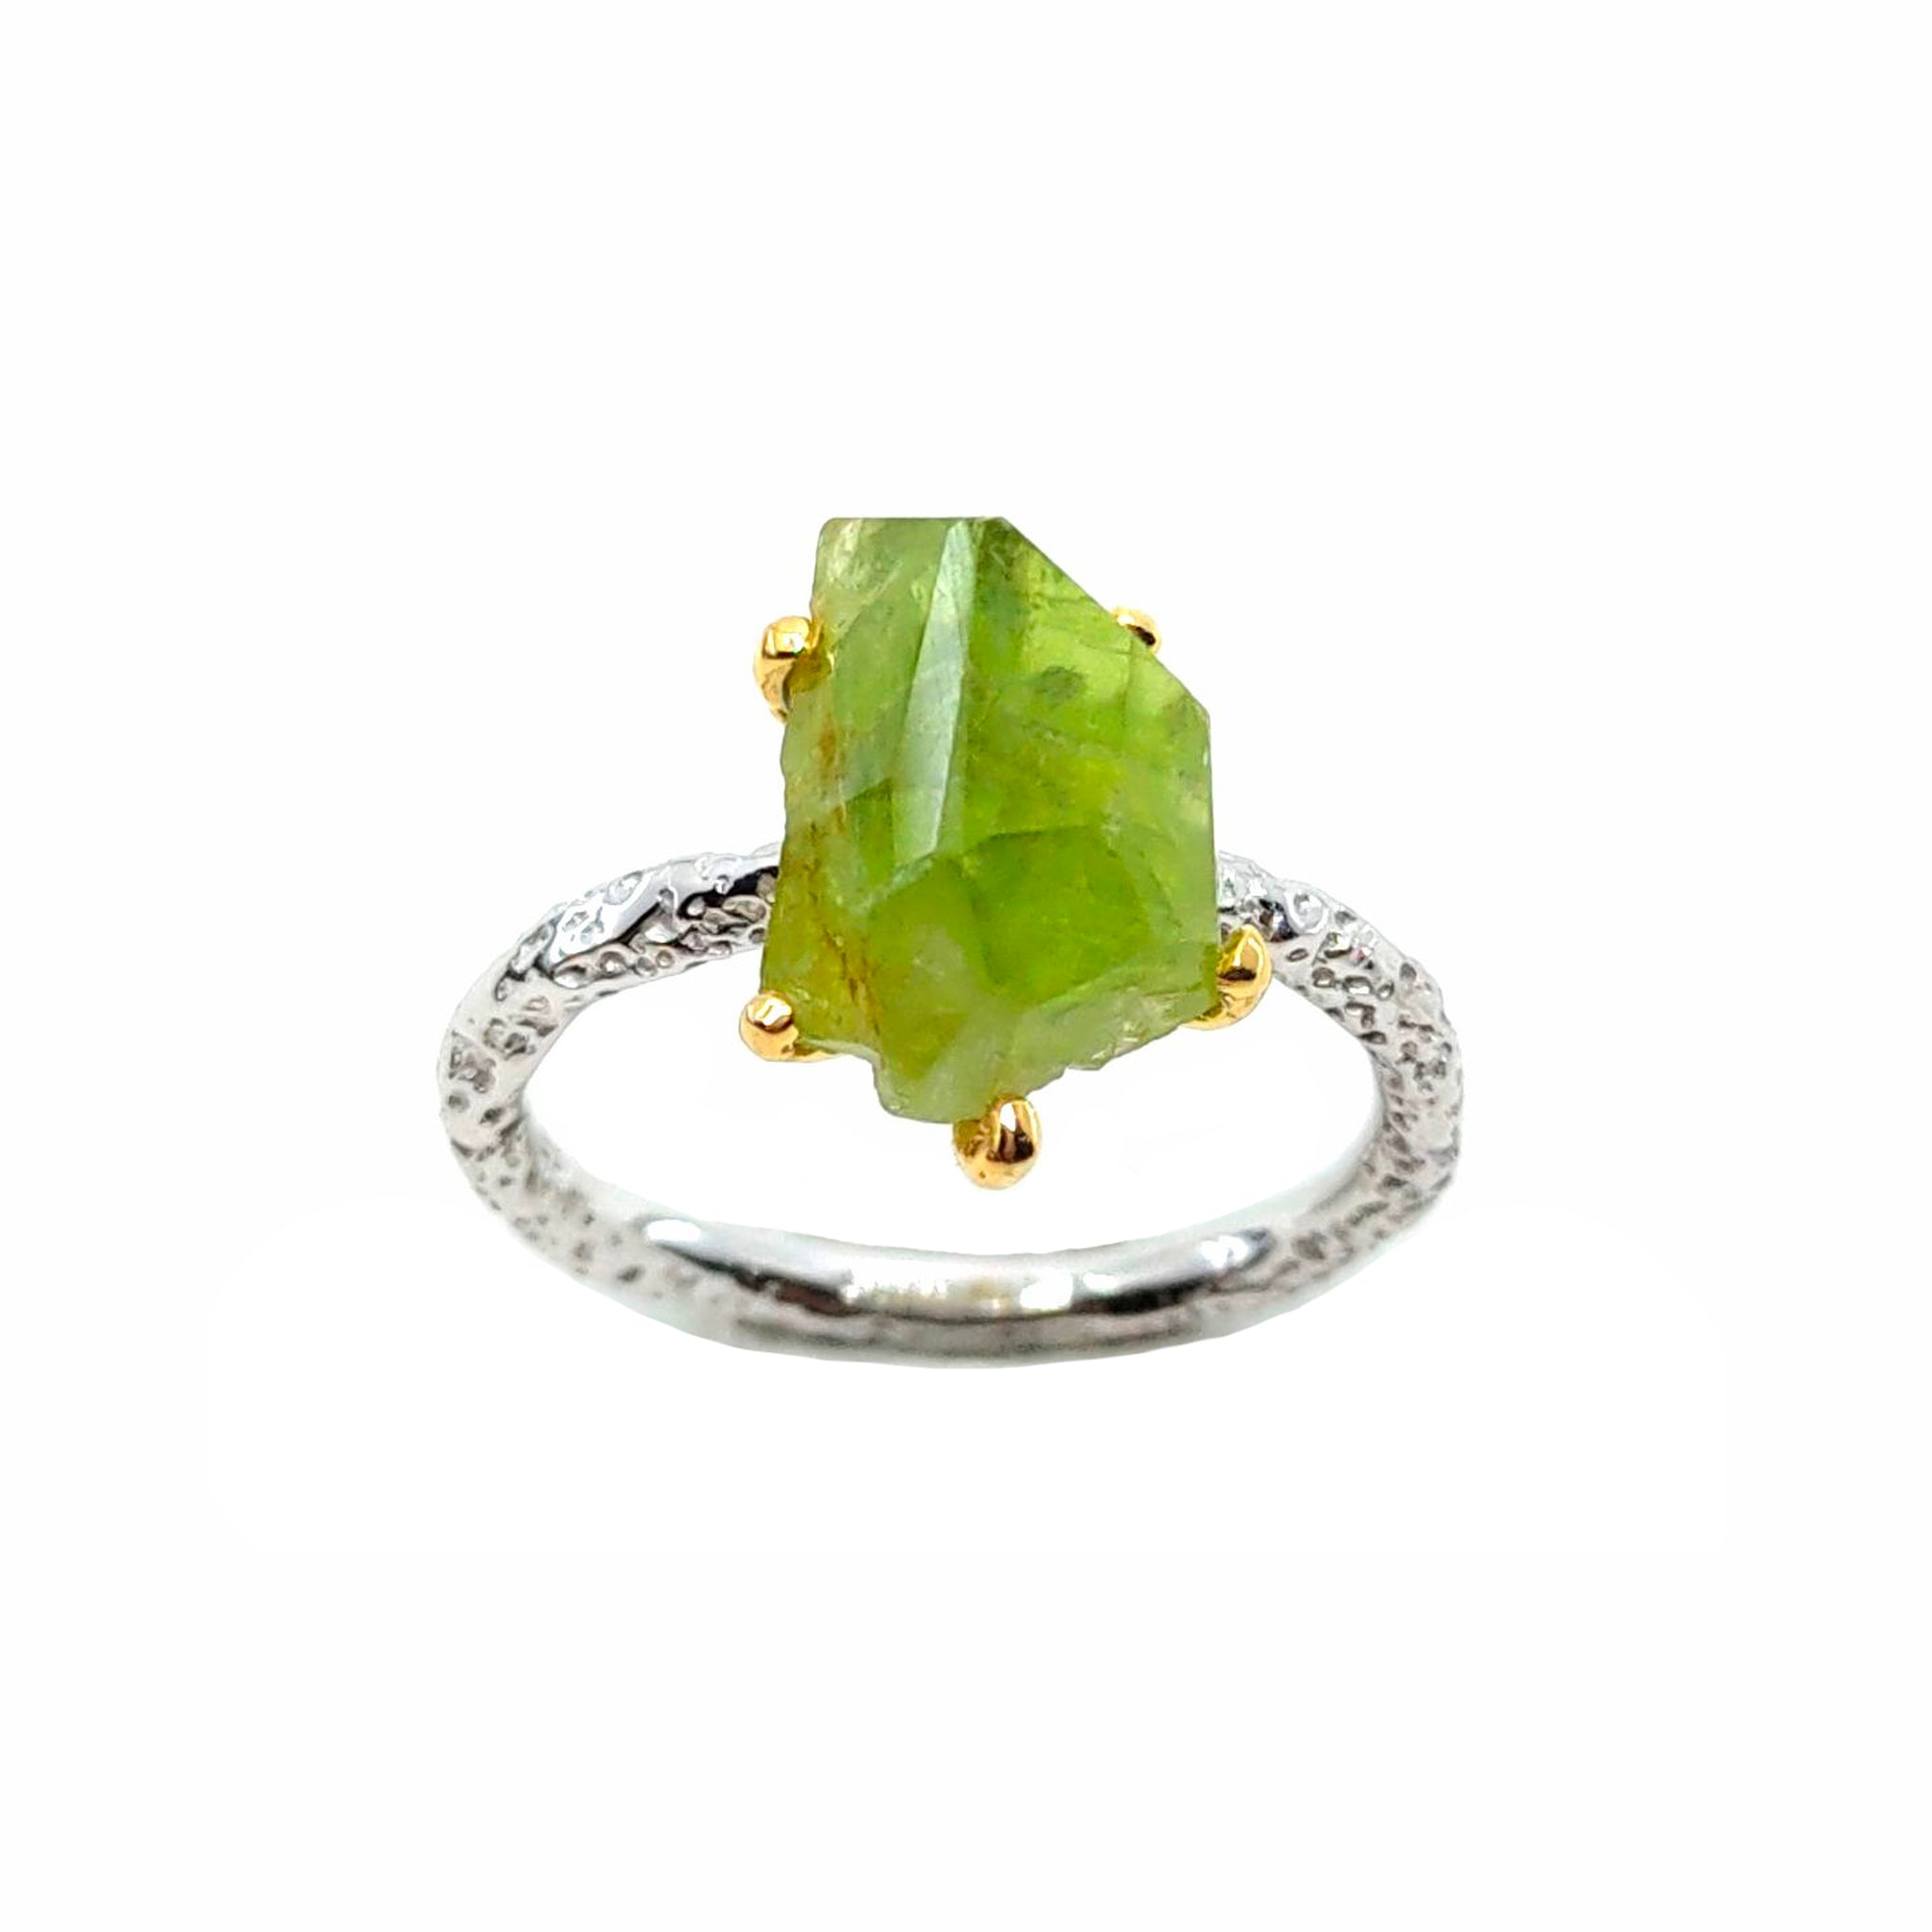 Rough Stone - 925 Sterling Silver Ring, Rough Faceted Peridot, Plated with 3 Micron 22K Yellow Gold and White Rhodium